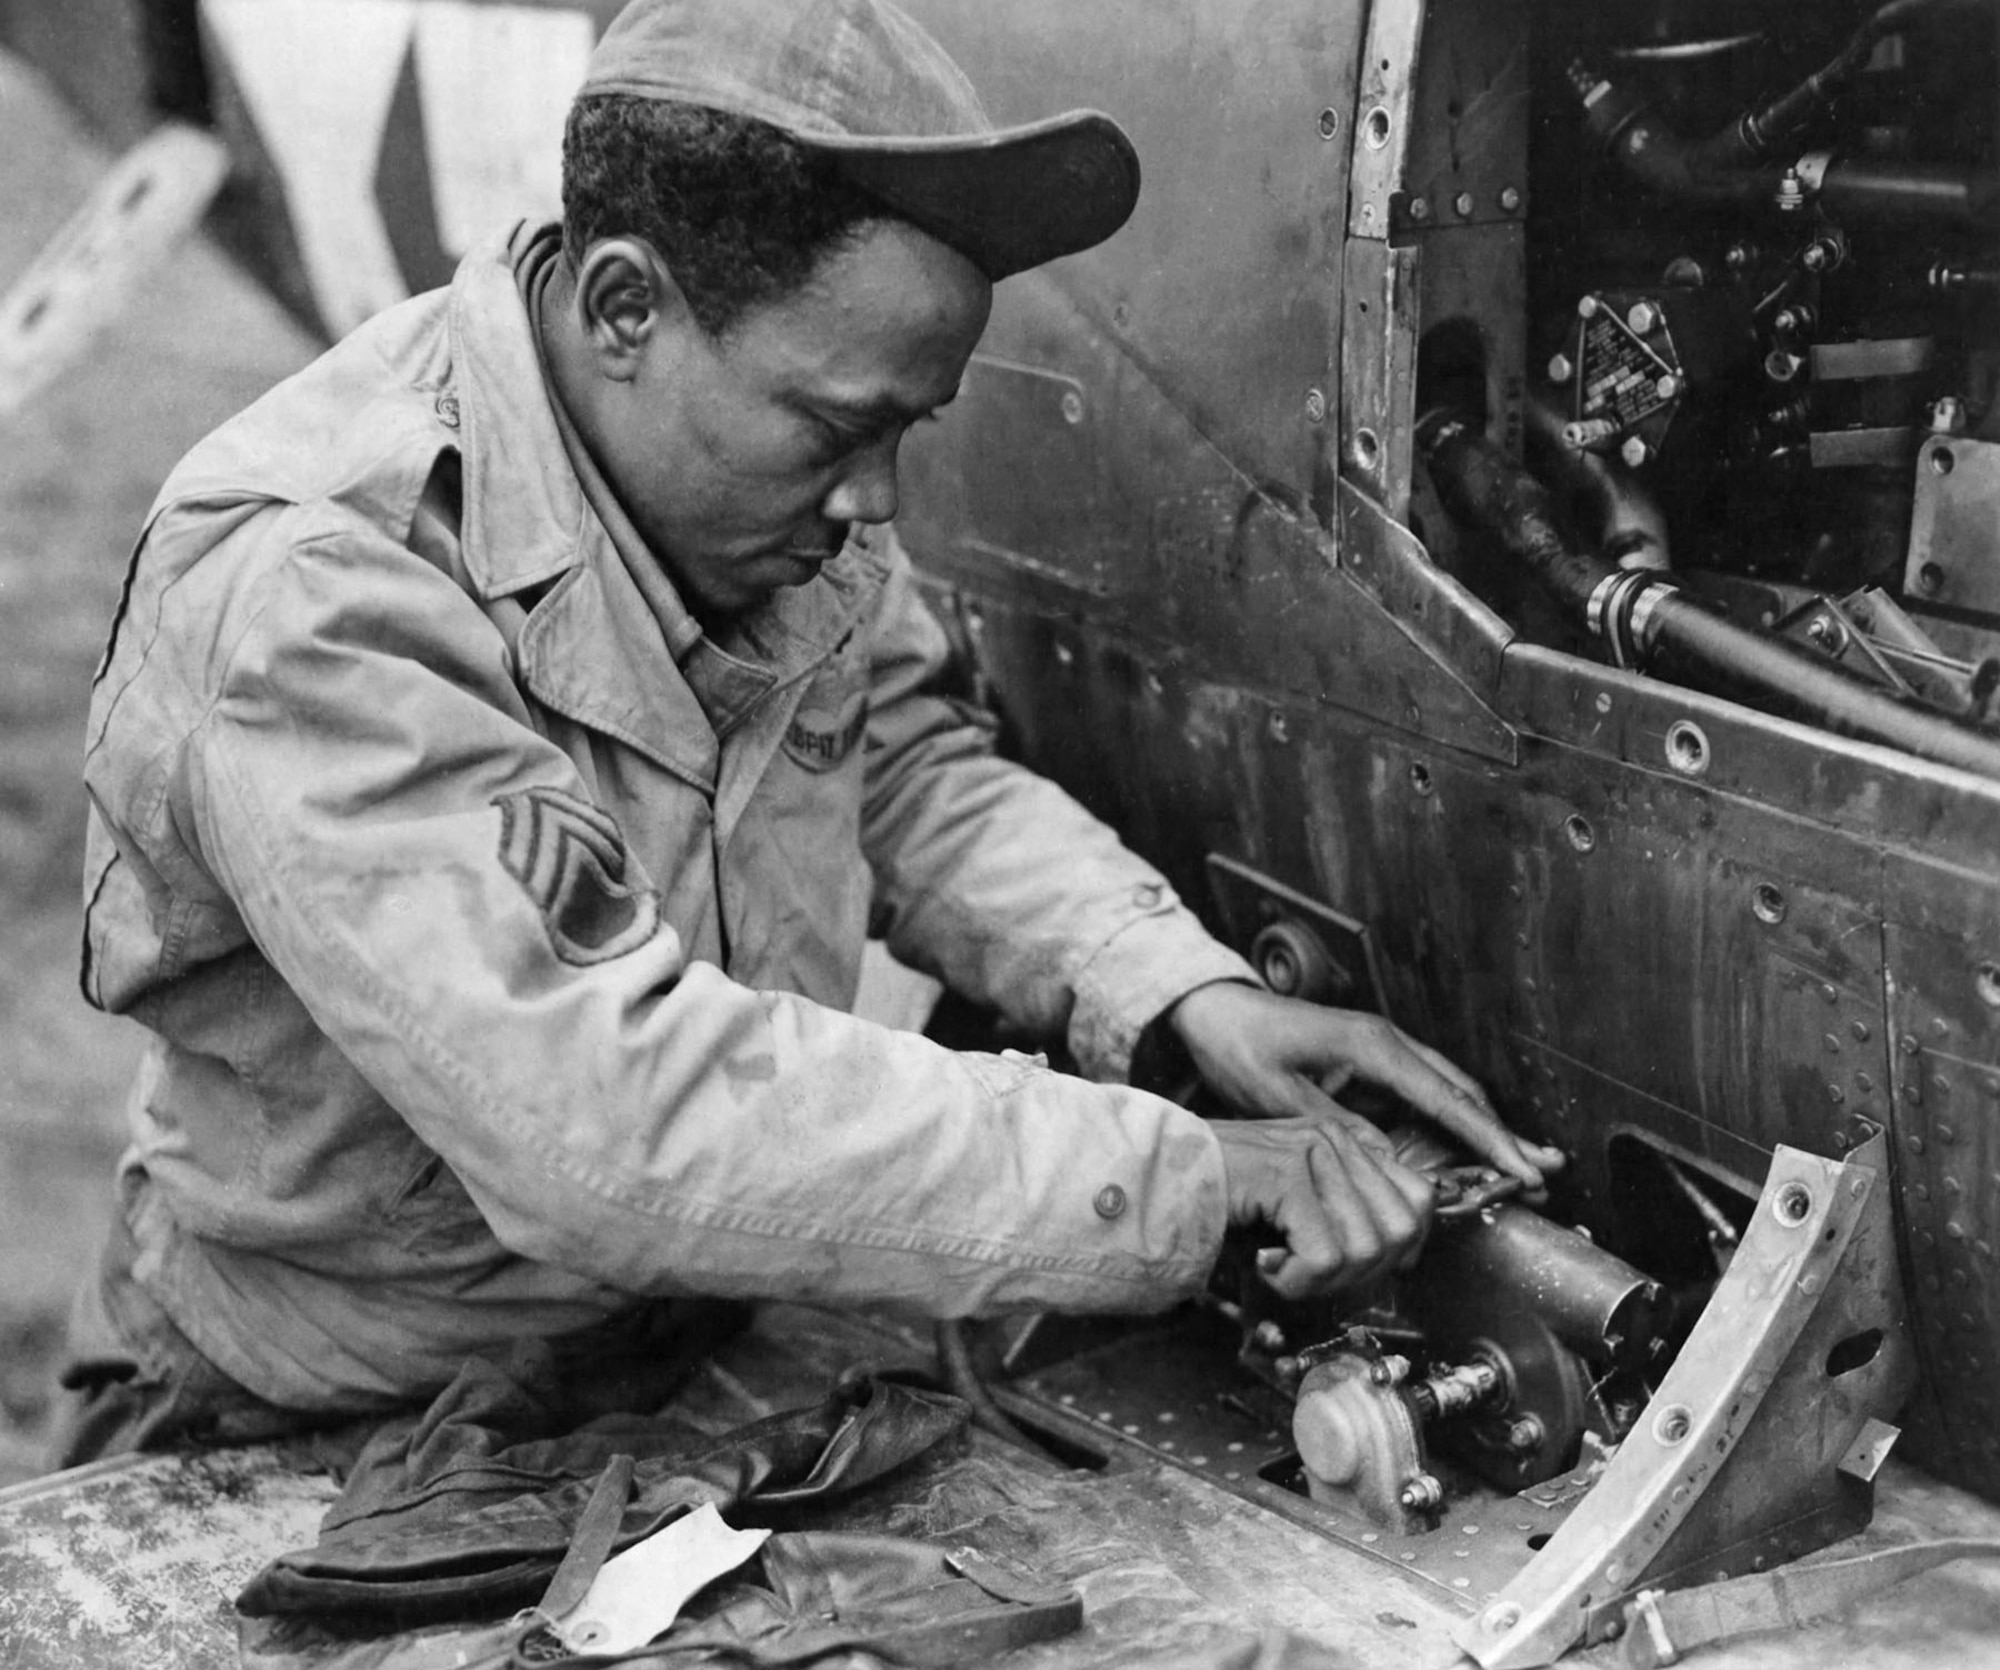 Staff Sgt. James McGee, shown working on one of the 332nd Fighter Group’s P-39 Airacobras in Italy, kept their aircraft combat ready. (U.S. Air Force photo)